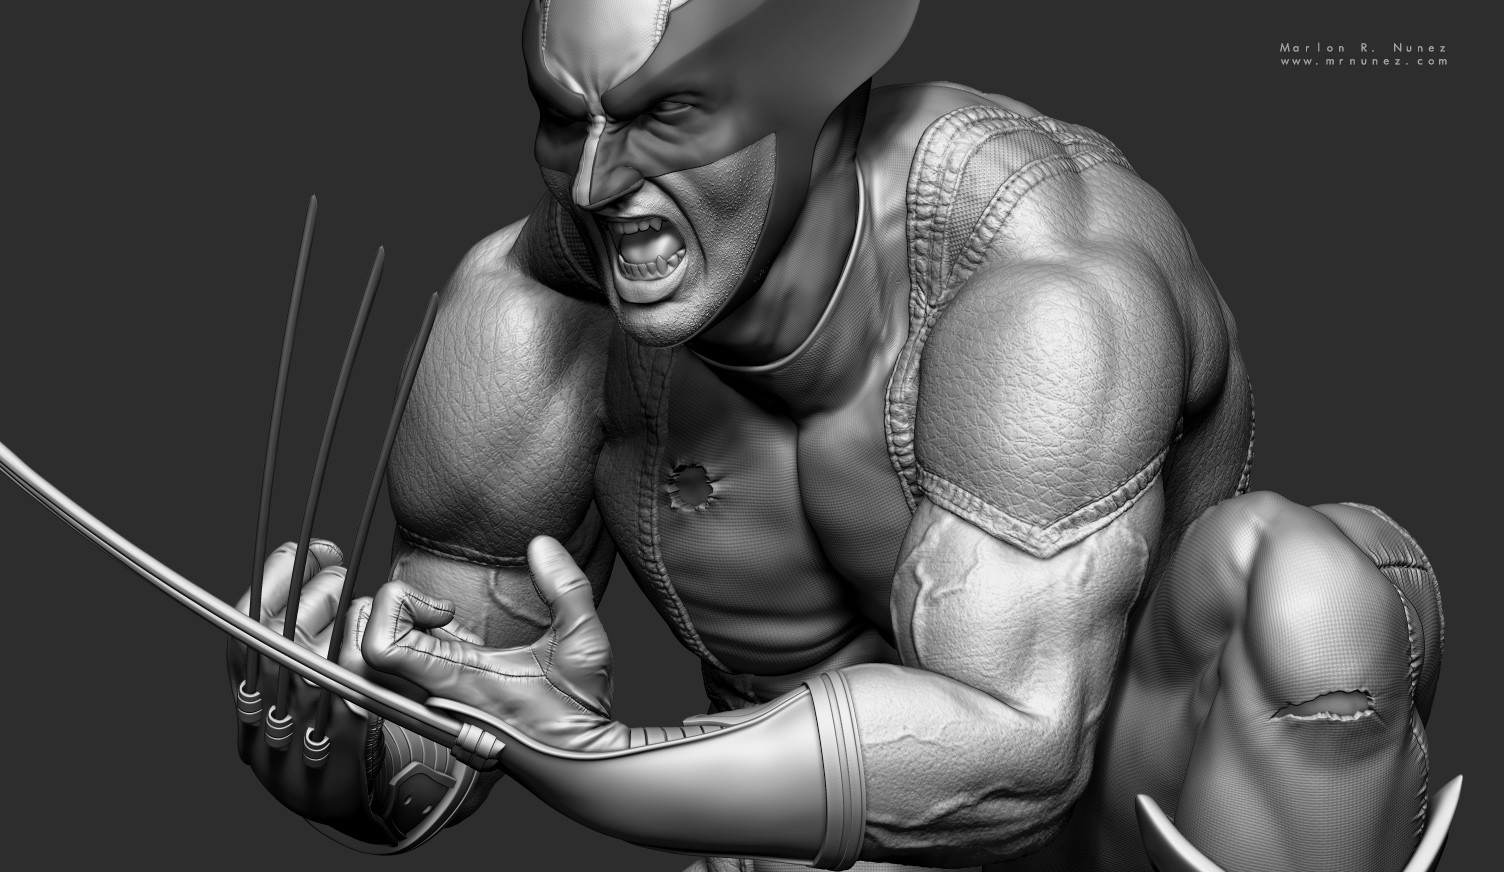 The Movie Sleuth Images 3d Art And 1 4 Custom Statue Designs Of Marvel Comics Wolverine